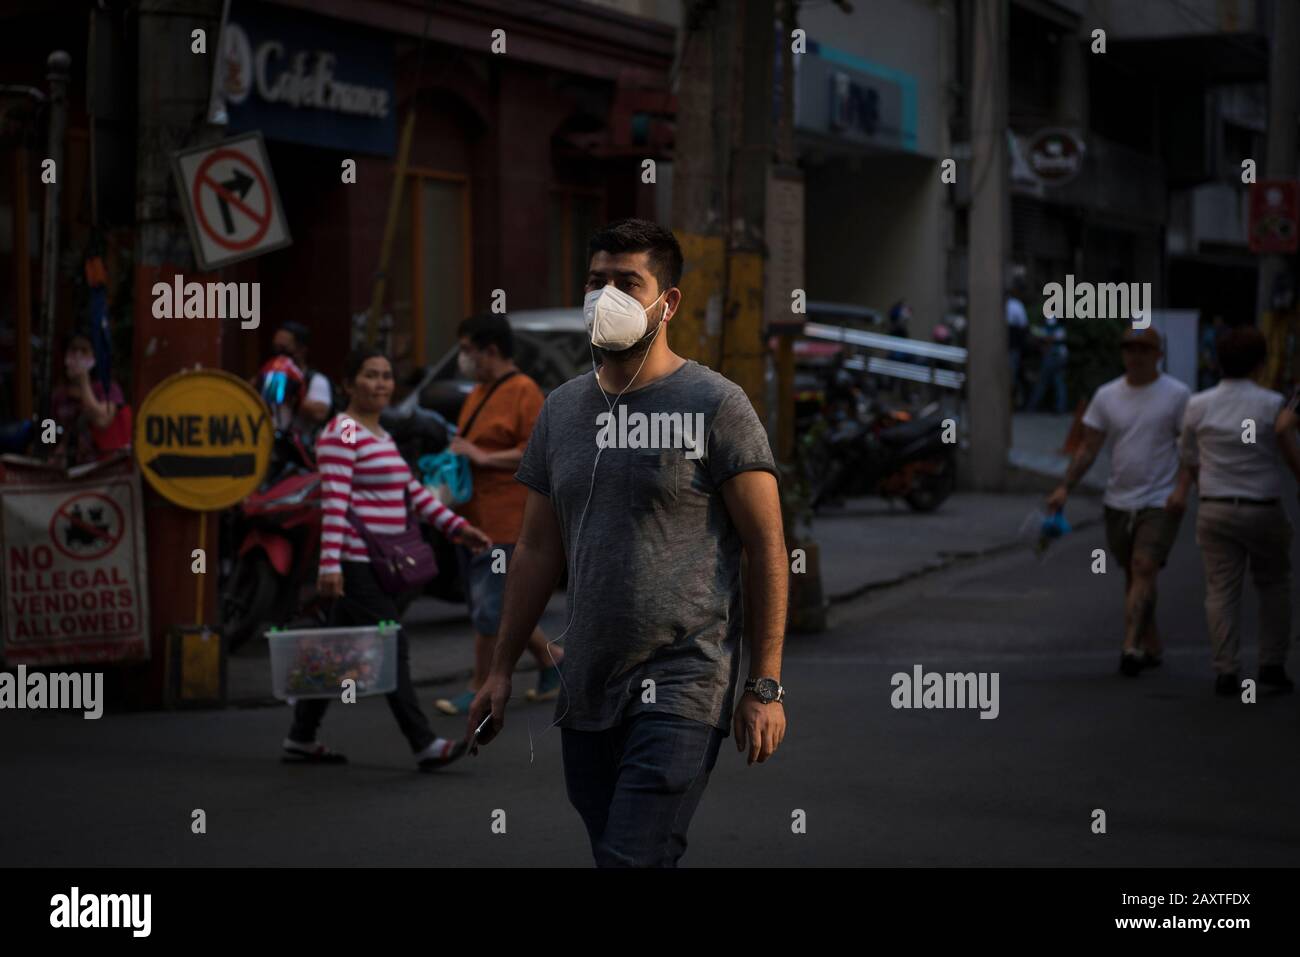 Manila, Philippines. 12th Feb, 2020. A man wears a face mask as a precaution to the outbreak of the coronavirus. Filipinos remain anxious over a new coronavirus known as Covid-19 which originated in Wuhan, China in December 2019. The Philippines' Department of Health announced the country's first death due to the virus on 2 February - the first reported death outside of China. The number of 2019-nCoV cases worldwide has already surpassed that of the 2003 Sars epidemic, with the death toll now over 1300. Credit: SOPA Images Limited/Alamy Live News Stock Photo